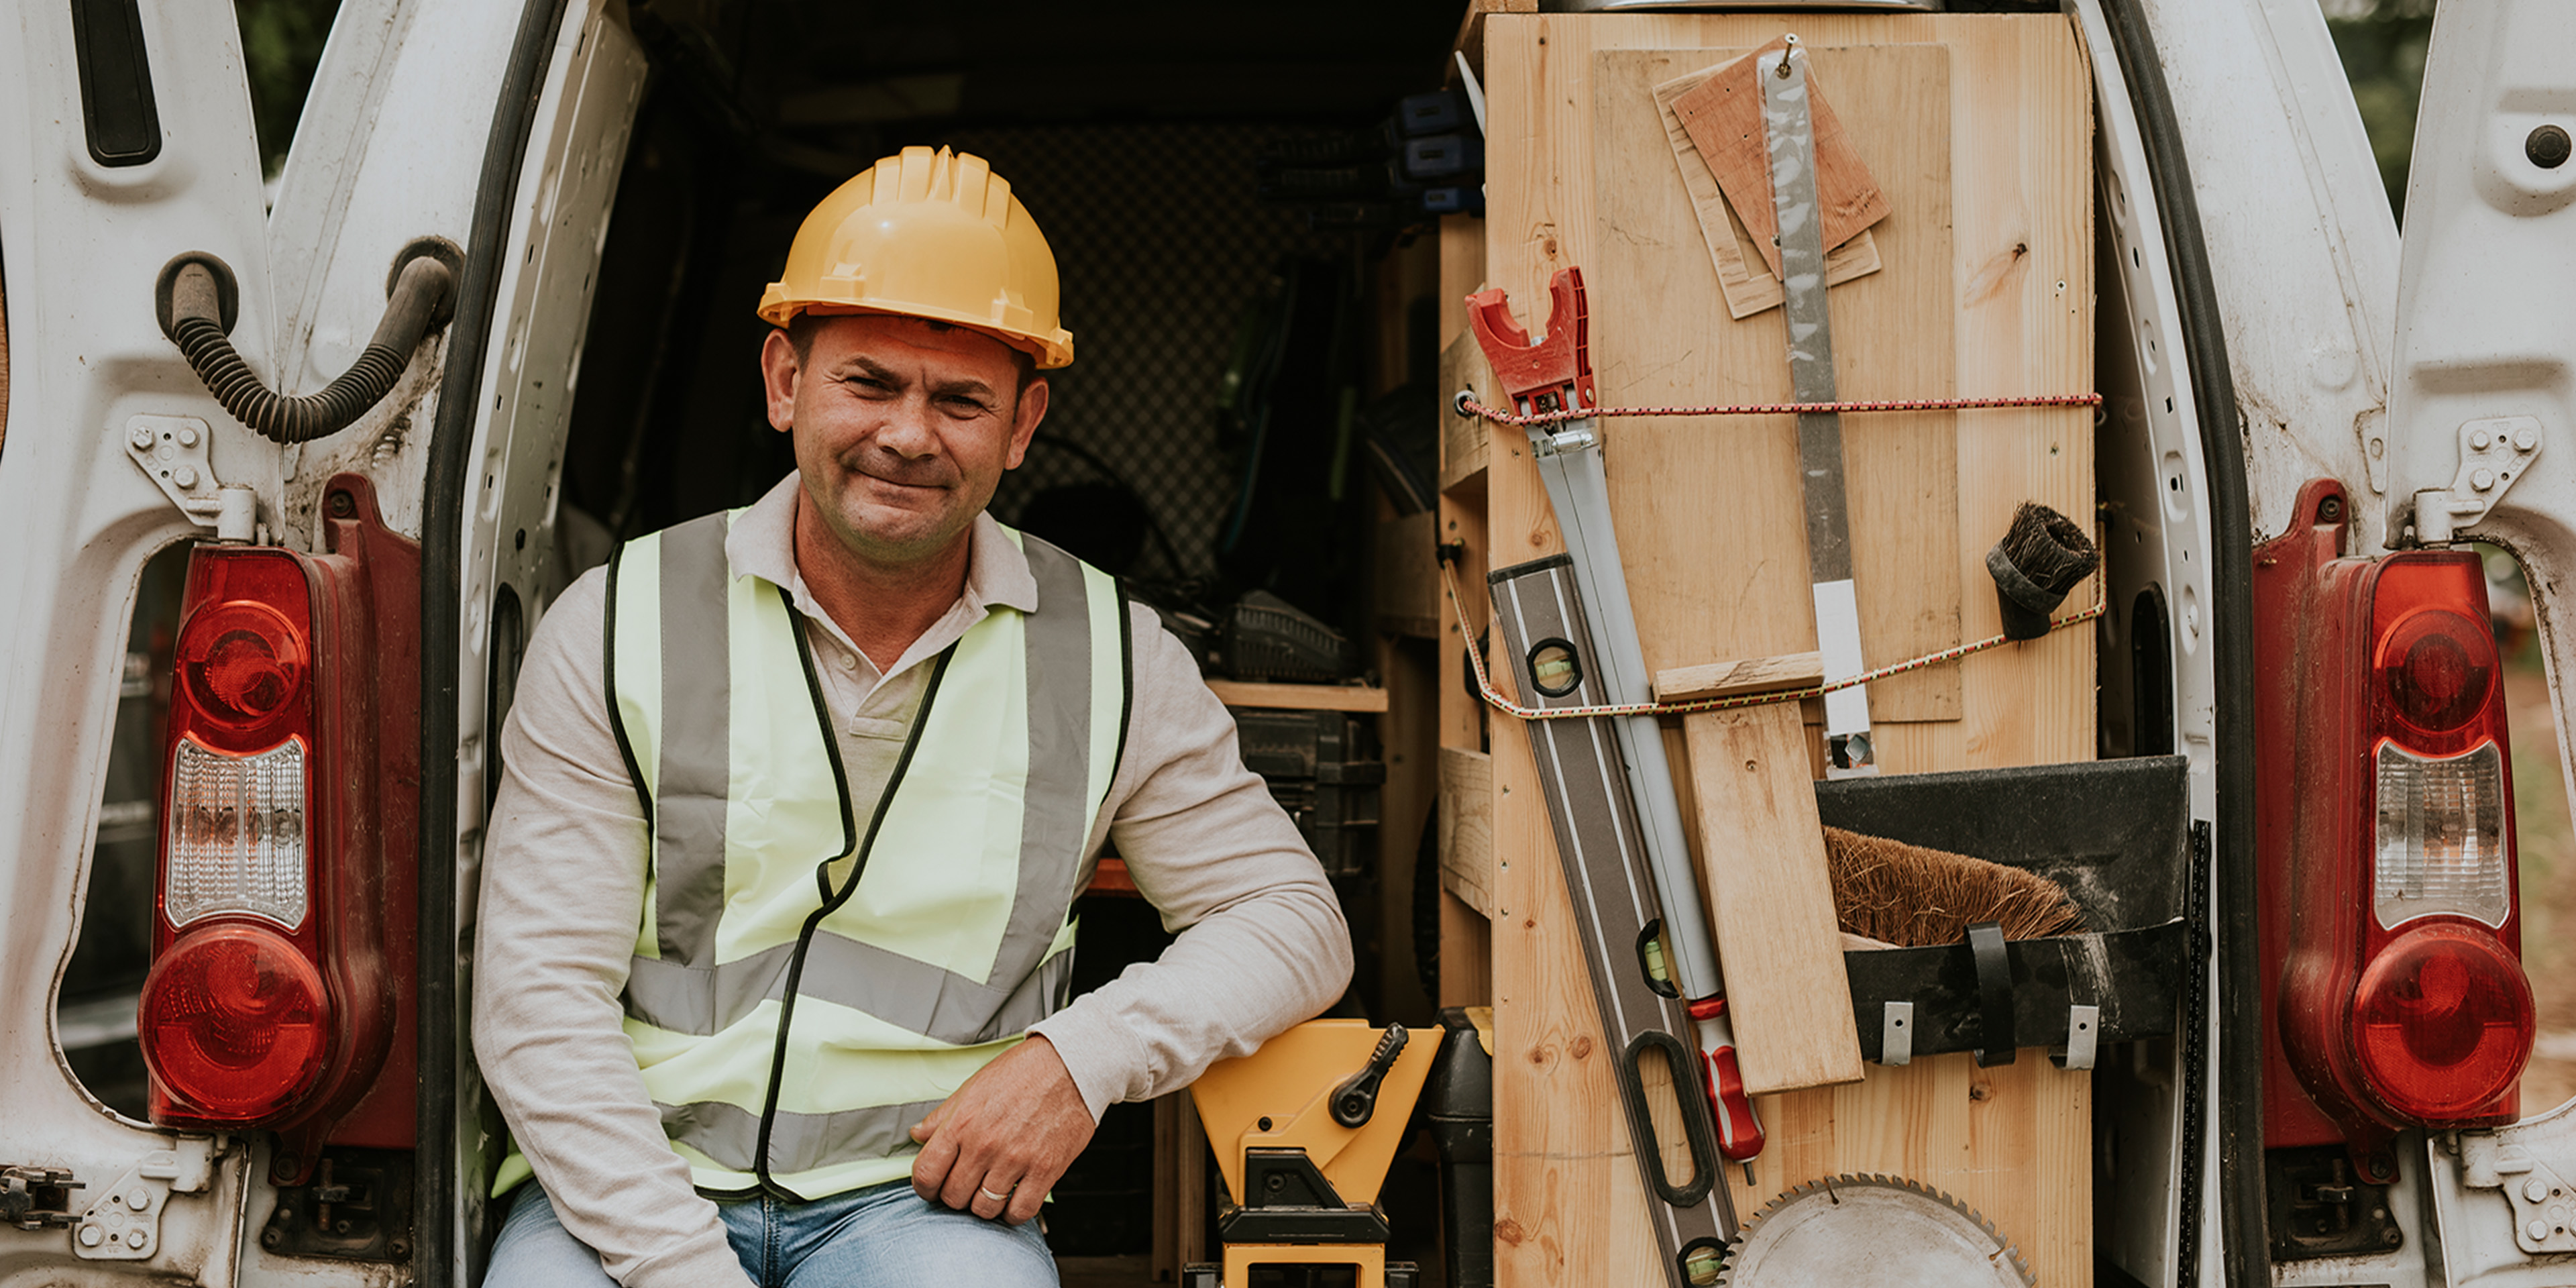 Know your contractor: A glossary of qualifications and insurances 